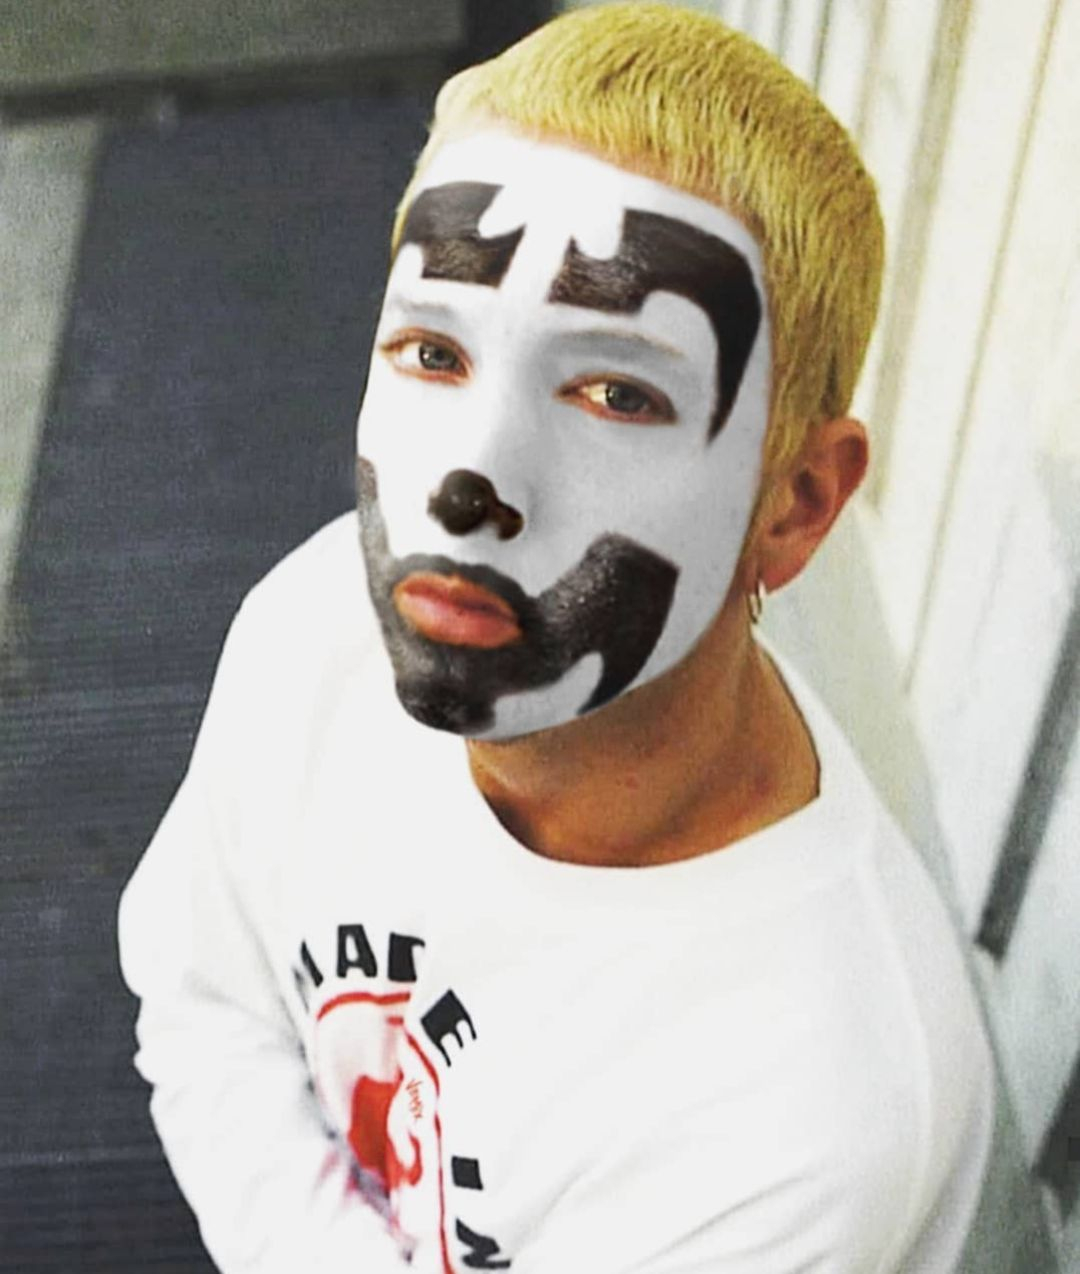 sporting the make-up of fellow Detroit rappers, The ICP, after Violent J an...